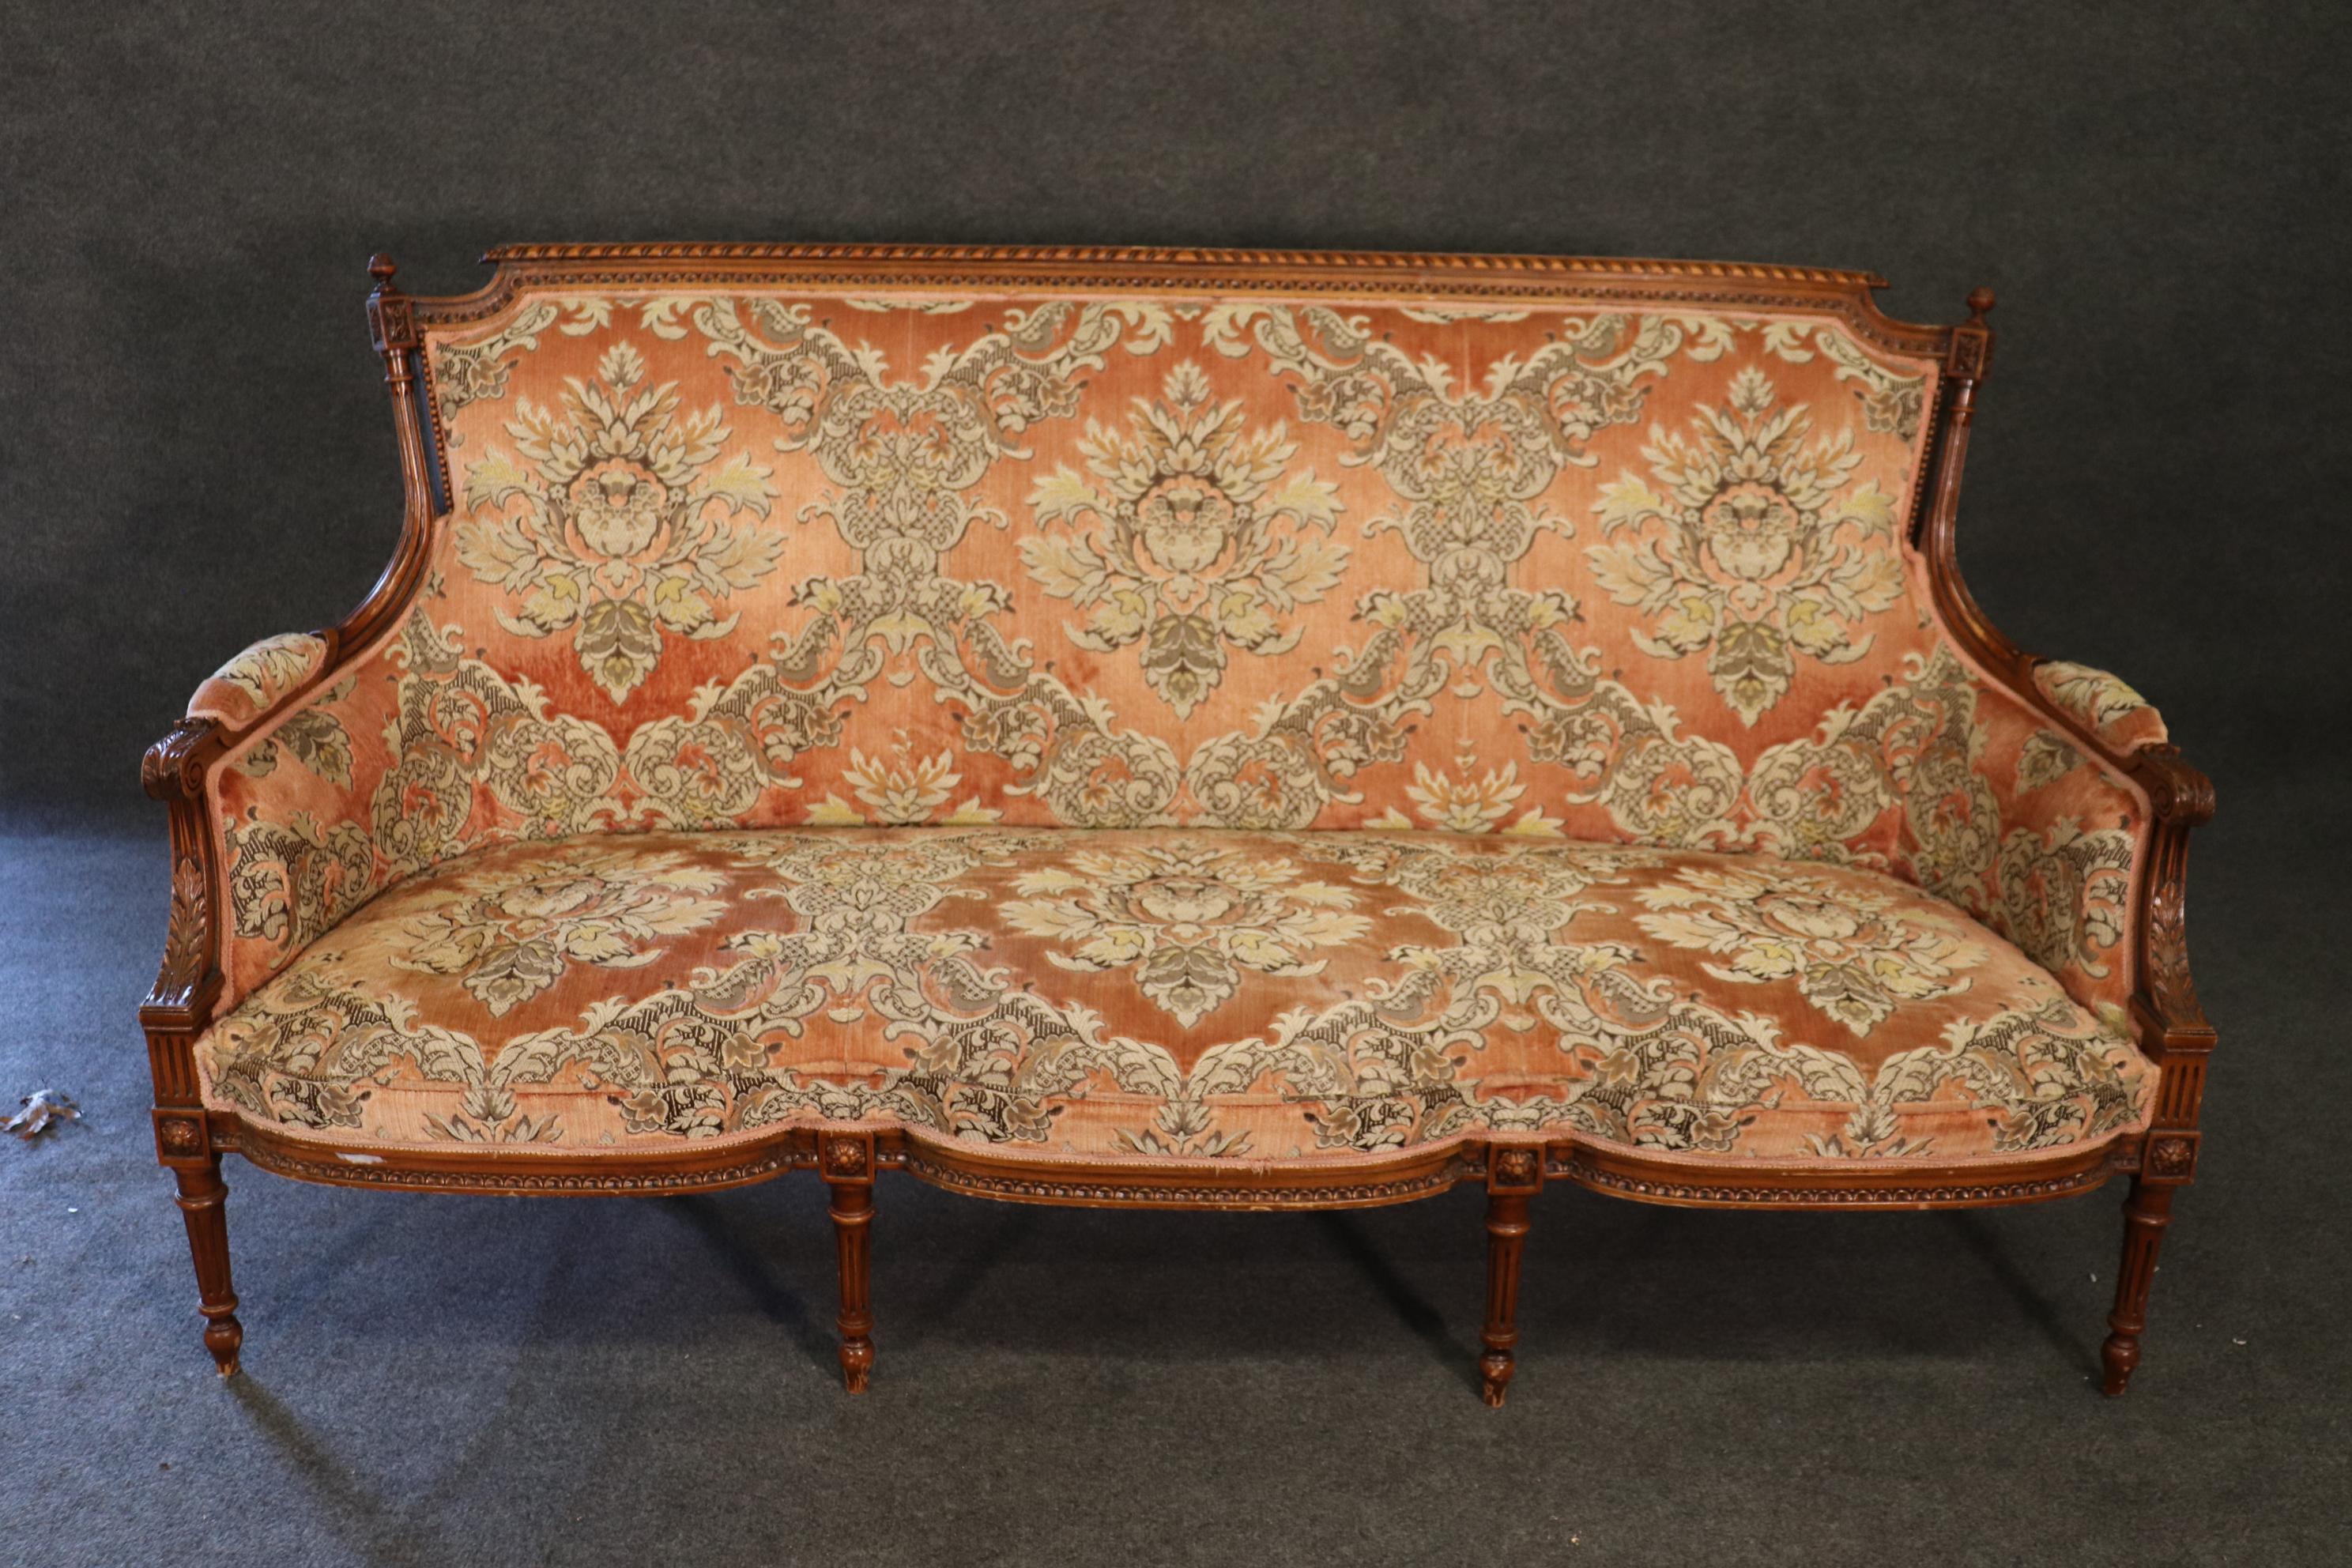 This is a gorgeous settee with stunning original velvet upholstery. The settee is in very good conditon with minor issues and measures 73 long x 38 tall x 33 deep x seat height 17. The upholstery is in very good condition.